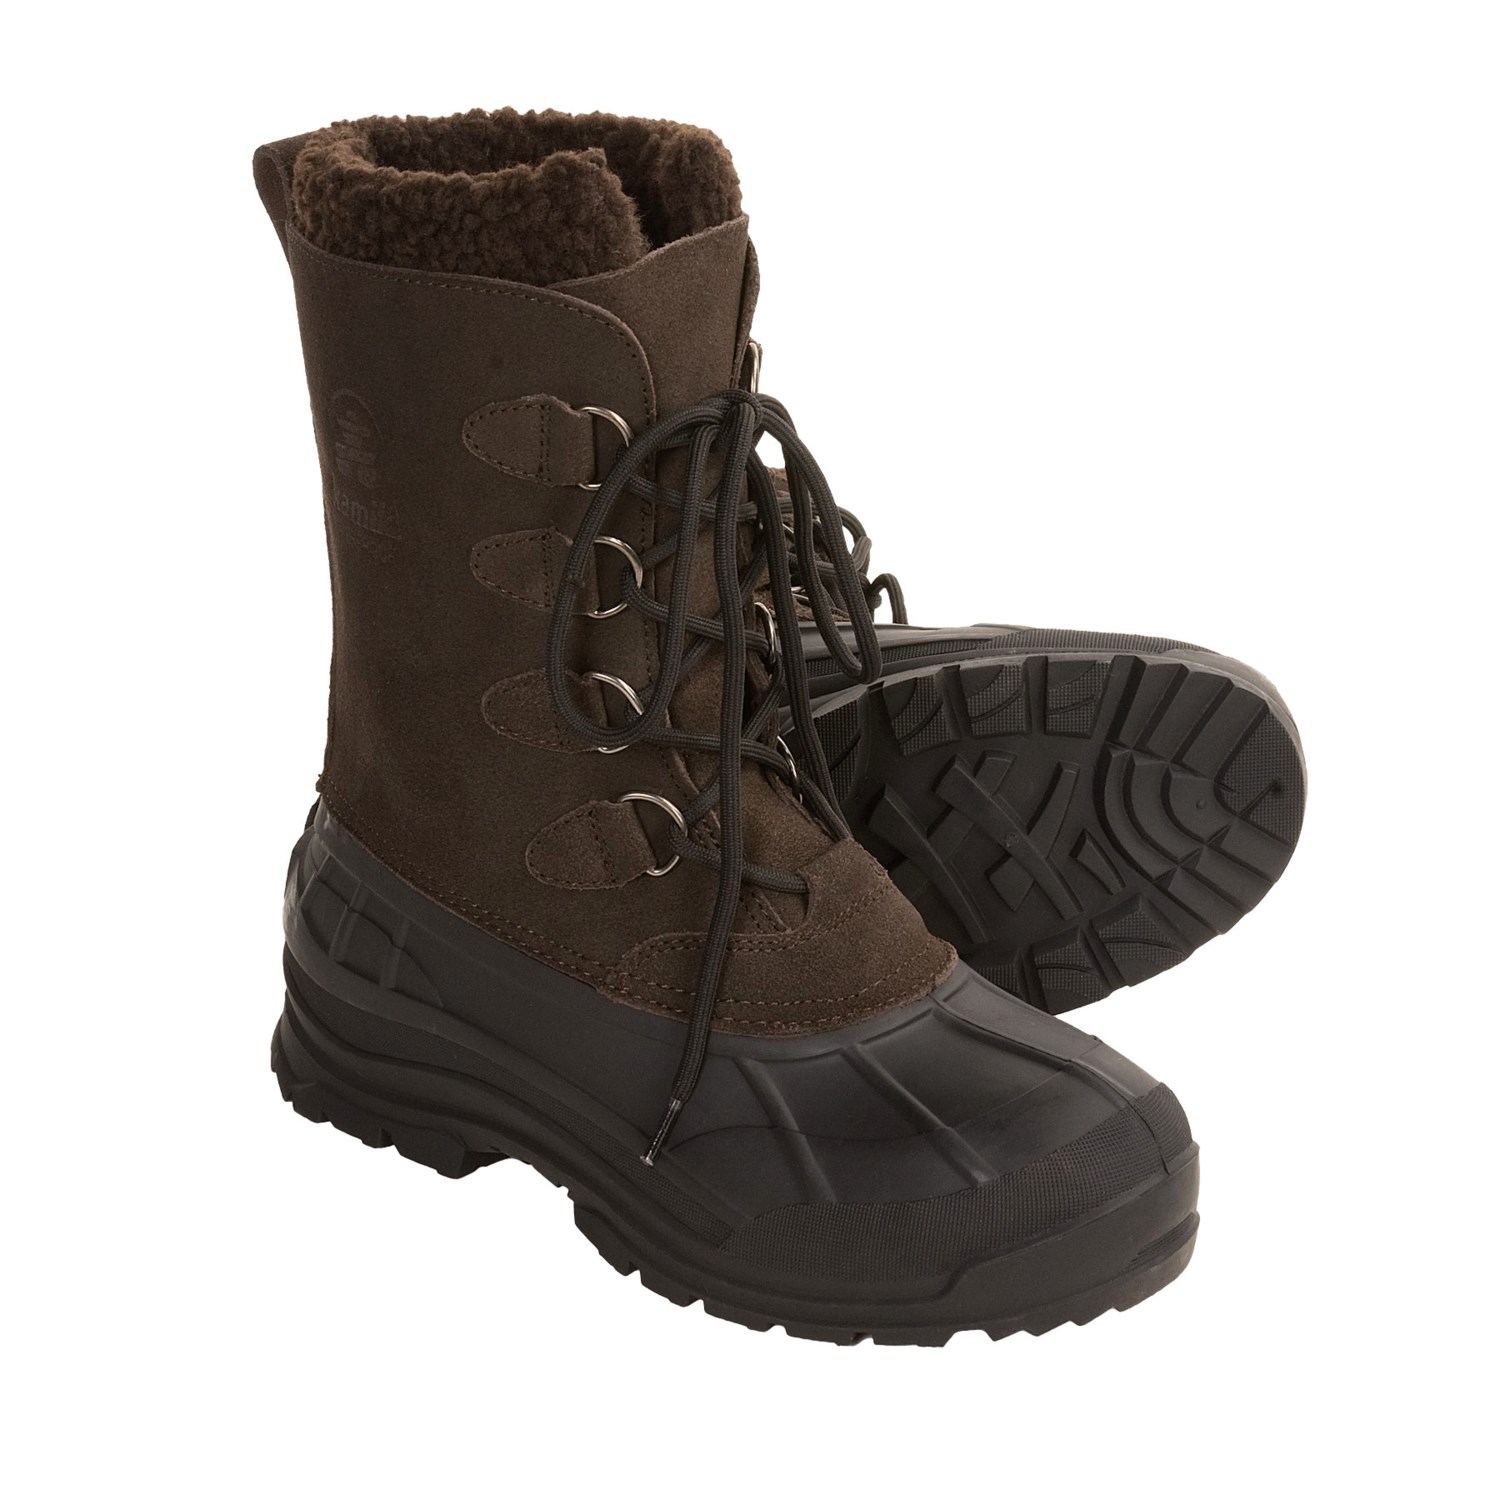 Top Rated Mens Winter Boots | Planetary Skin Institute